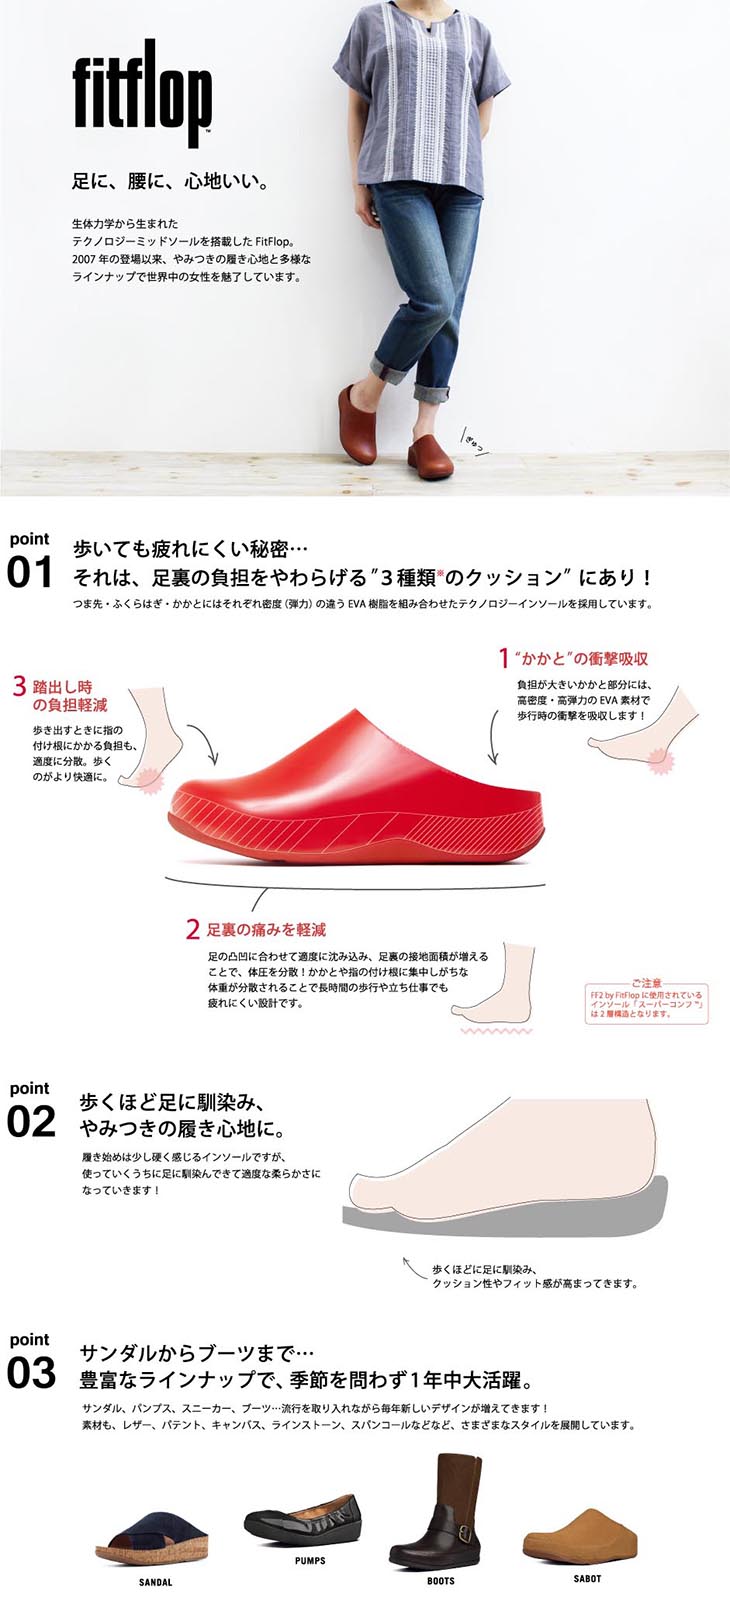 fitflop_pc_1